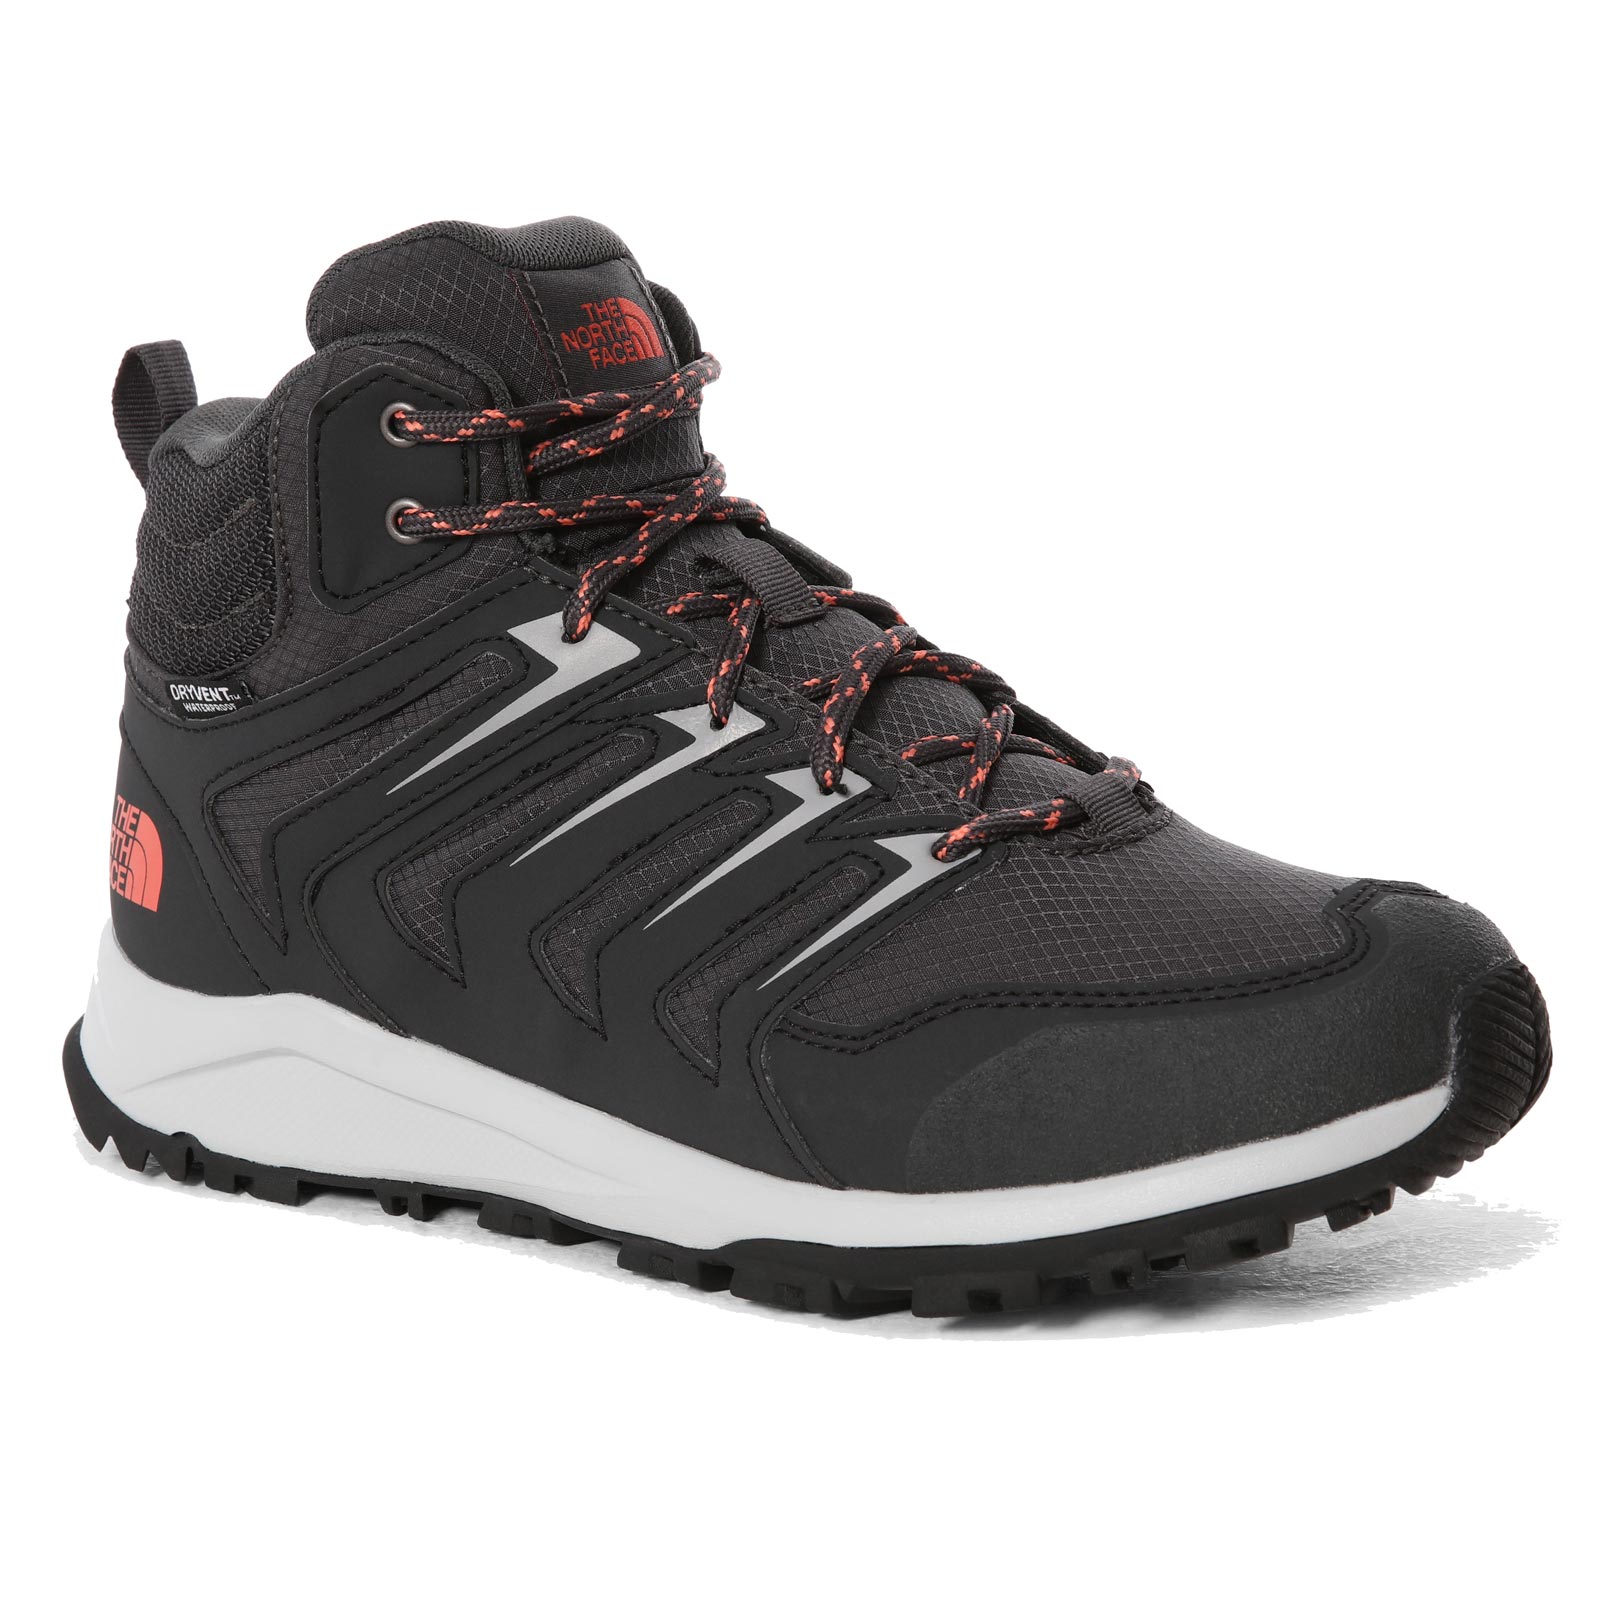 THE NORTH FACE VENTURE FASTHIKE II WOMENS HIKING SHOES